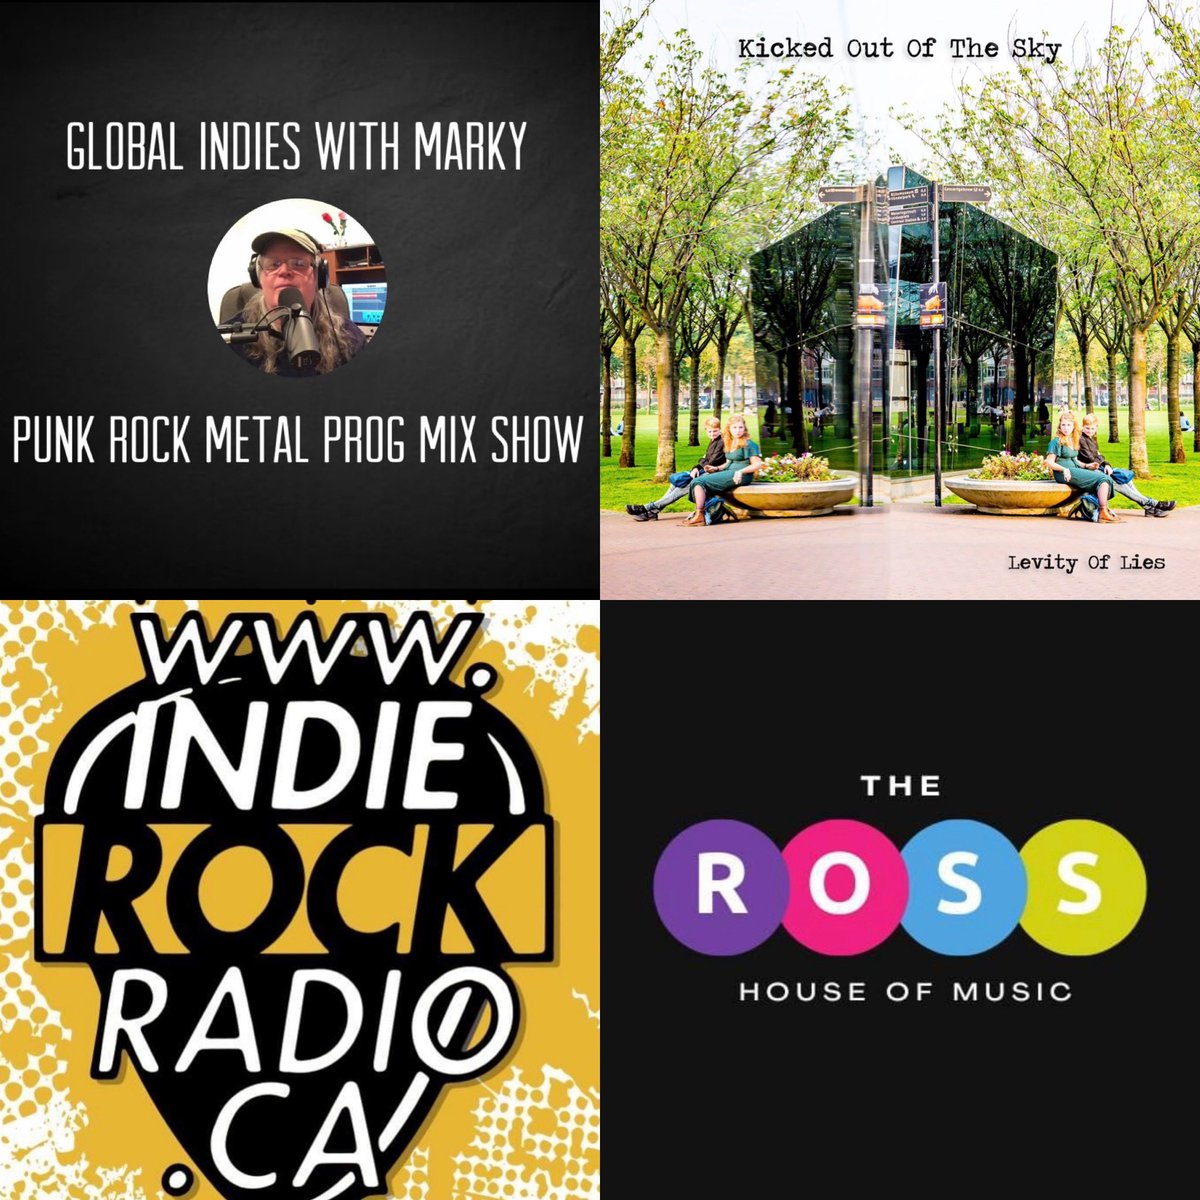 Tune in Thus. 04.19.24 for Global Indies With Marky on @IndieRockRadio2 & @rossmusichouse. Thank you @IndiesWithMarky for your awesome support!! Xx rosshouseofmusic.com 10AM EST 9AM CST 3PM BST indierockradio.ca 9PM EST 8PM CST 📸: @letgomedia